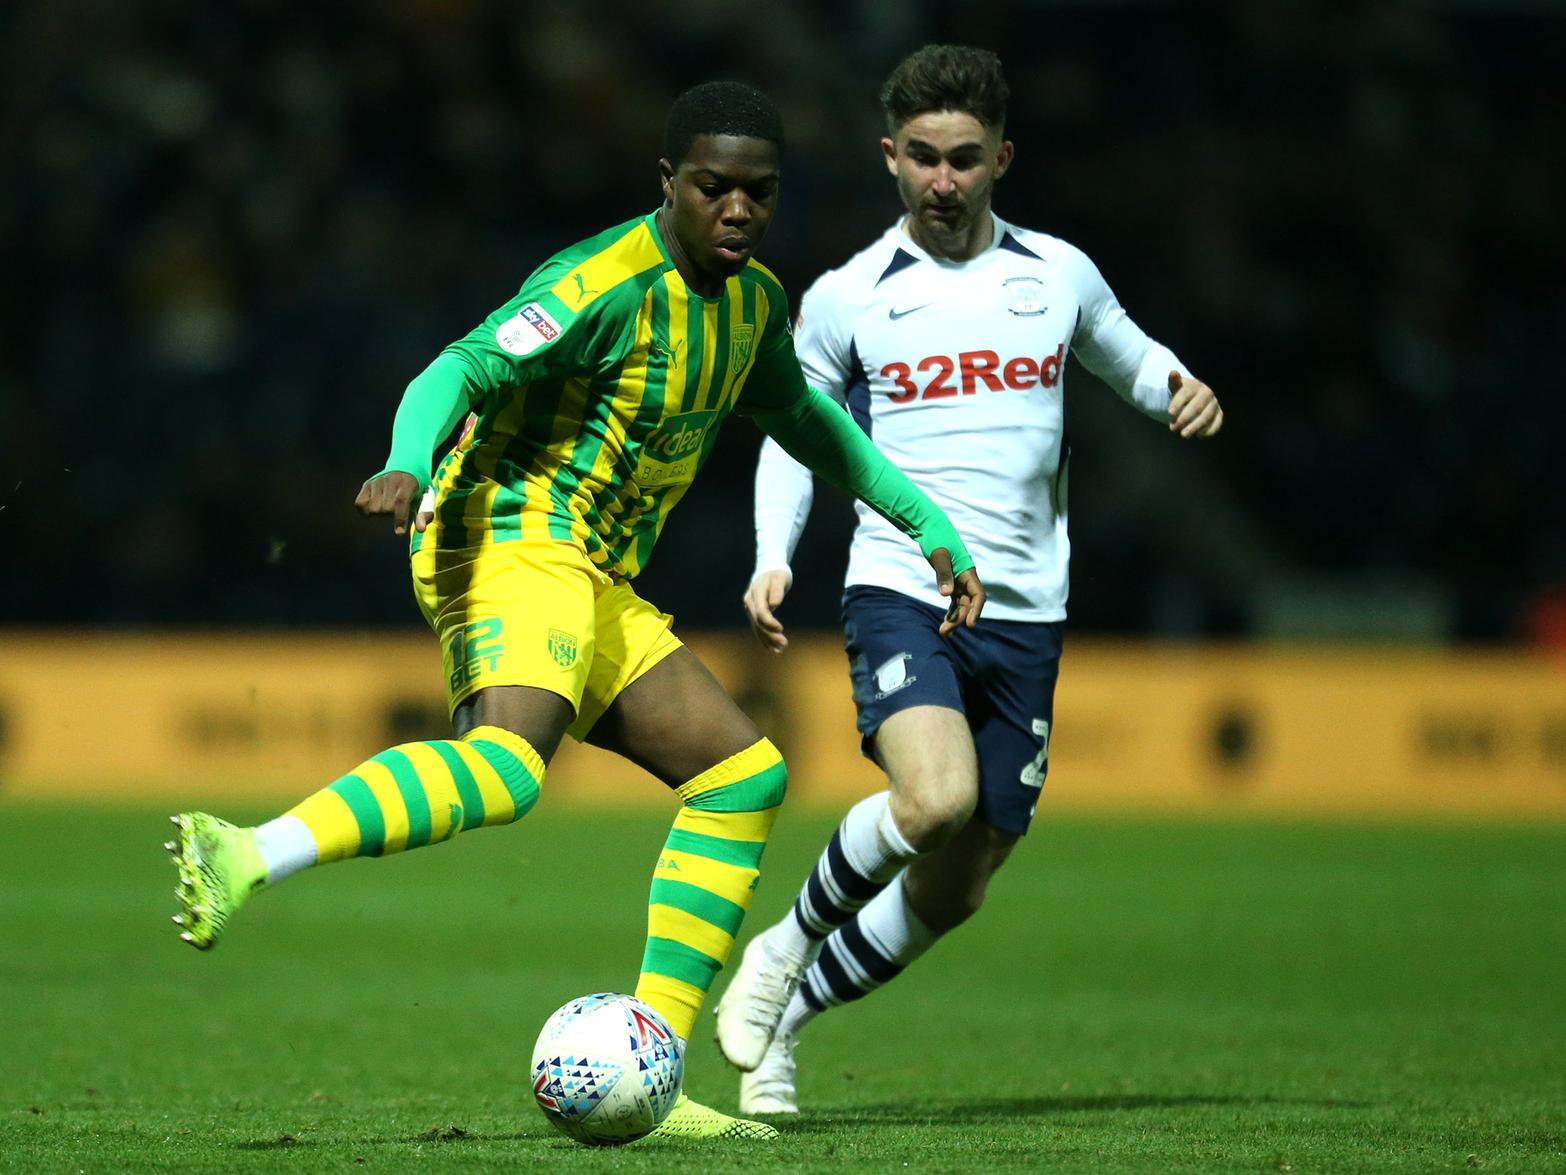 Scouts from both AC Milan and Spurs are understood to have watched West Bromwich Albion defender Nathan Ferguson in action last week, as interest continues to grow in the England U20 ace. (Birmingham Mail)